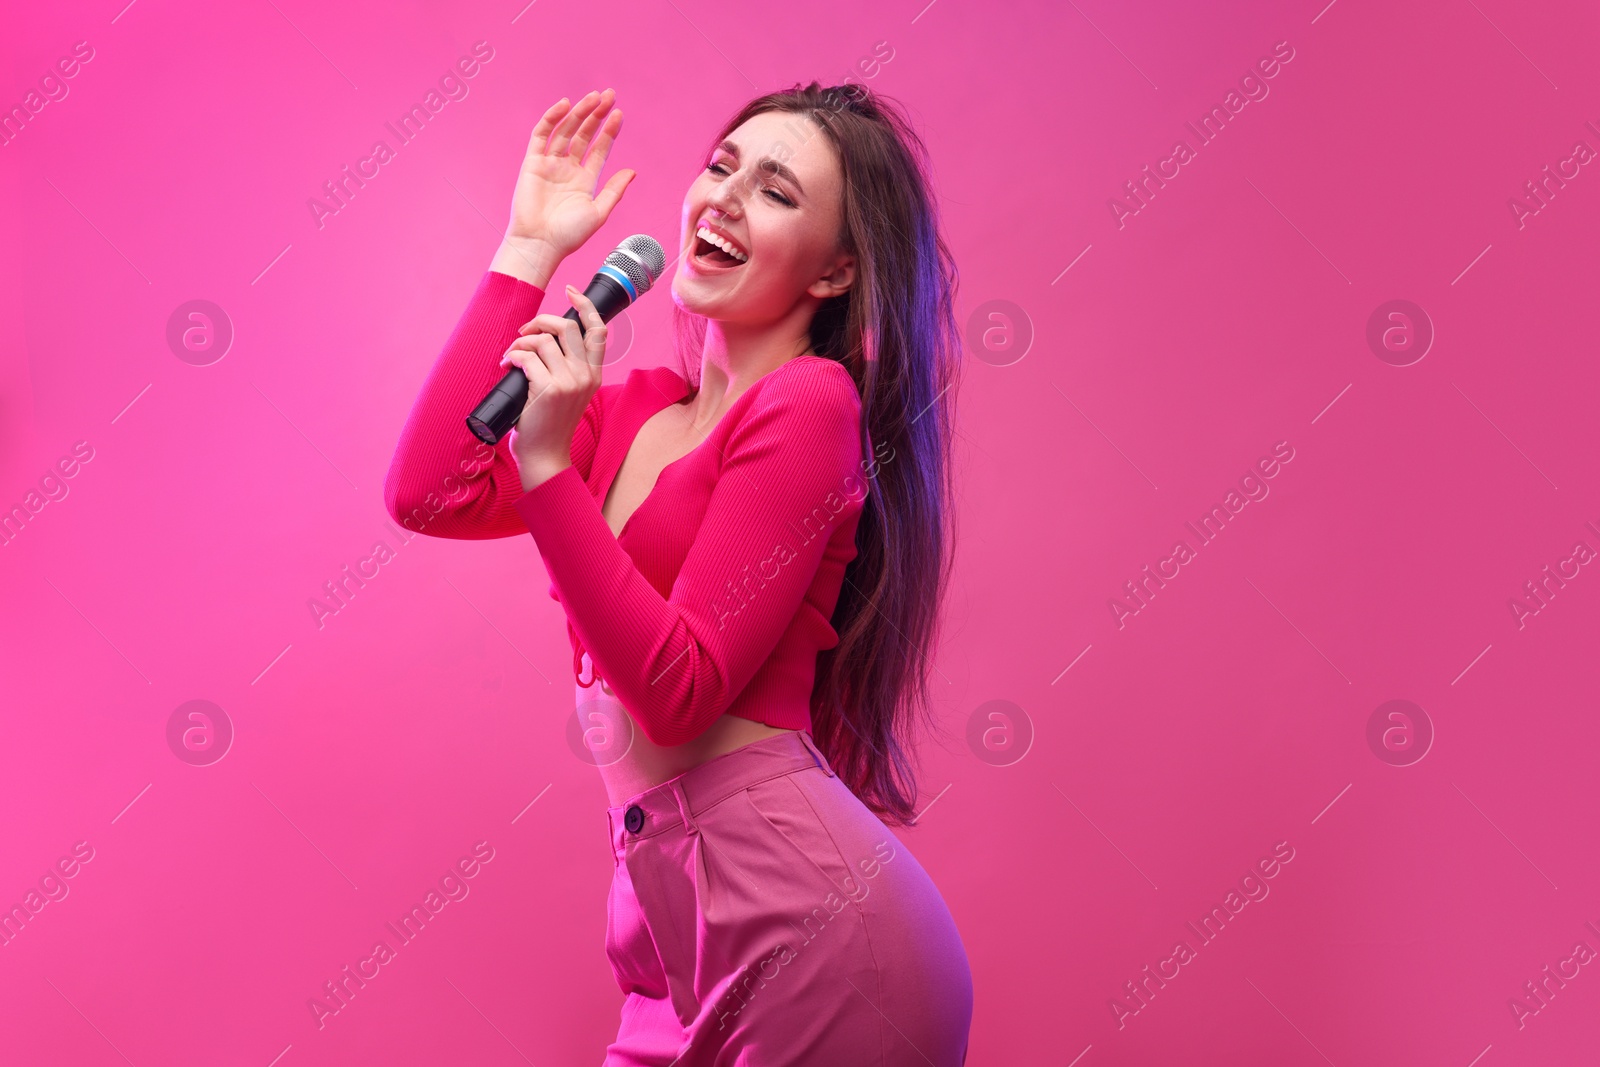 Photo of Emotional woman with microphone singing on pink background